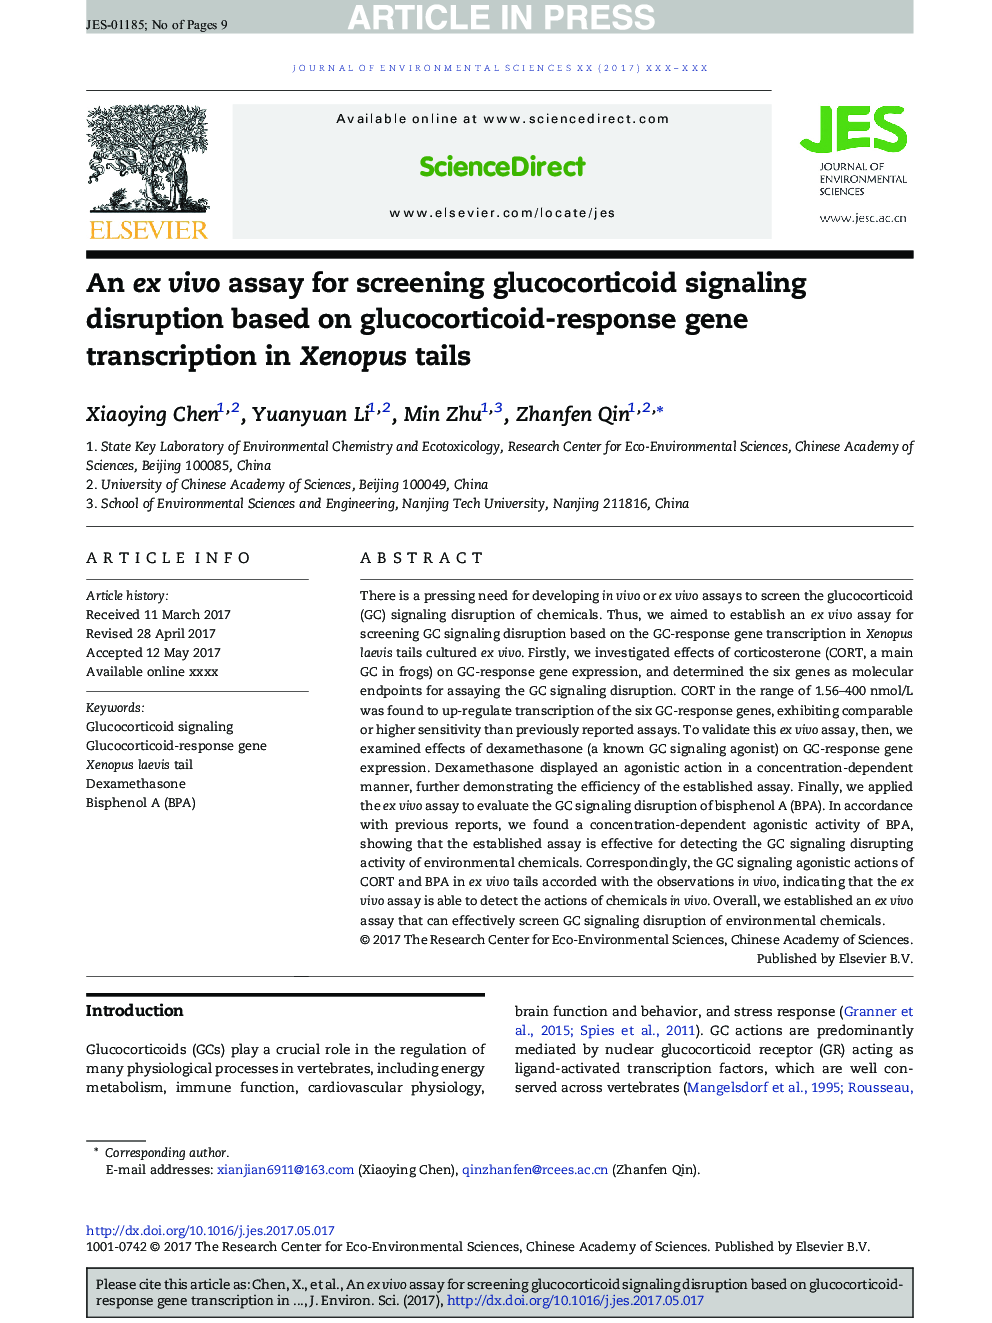 An ex vivo assay for screening glucocorticoid signaling disruption based on glucocorticoid-response gene transcription in Xenopus tails